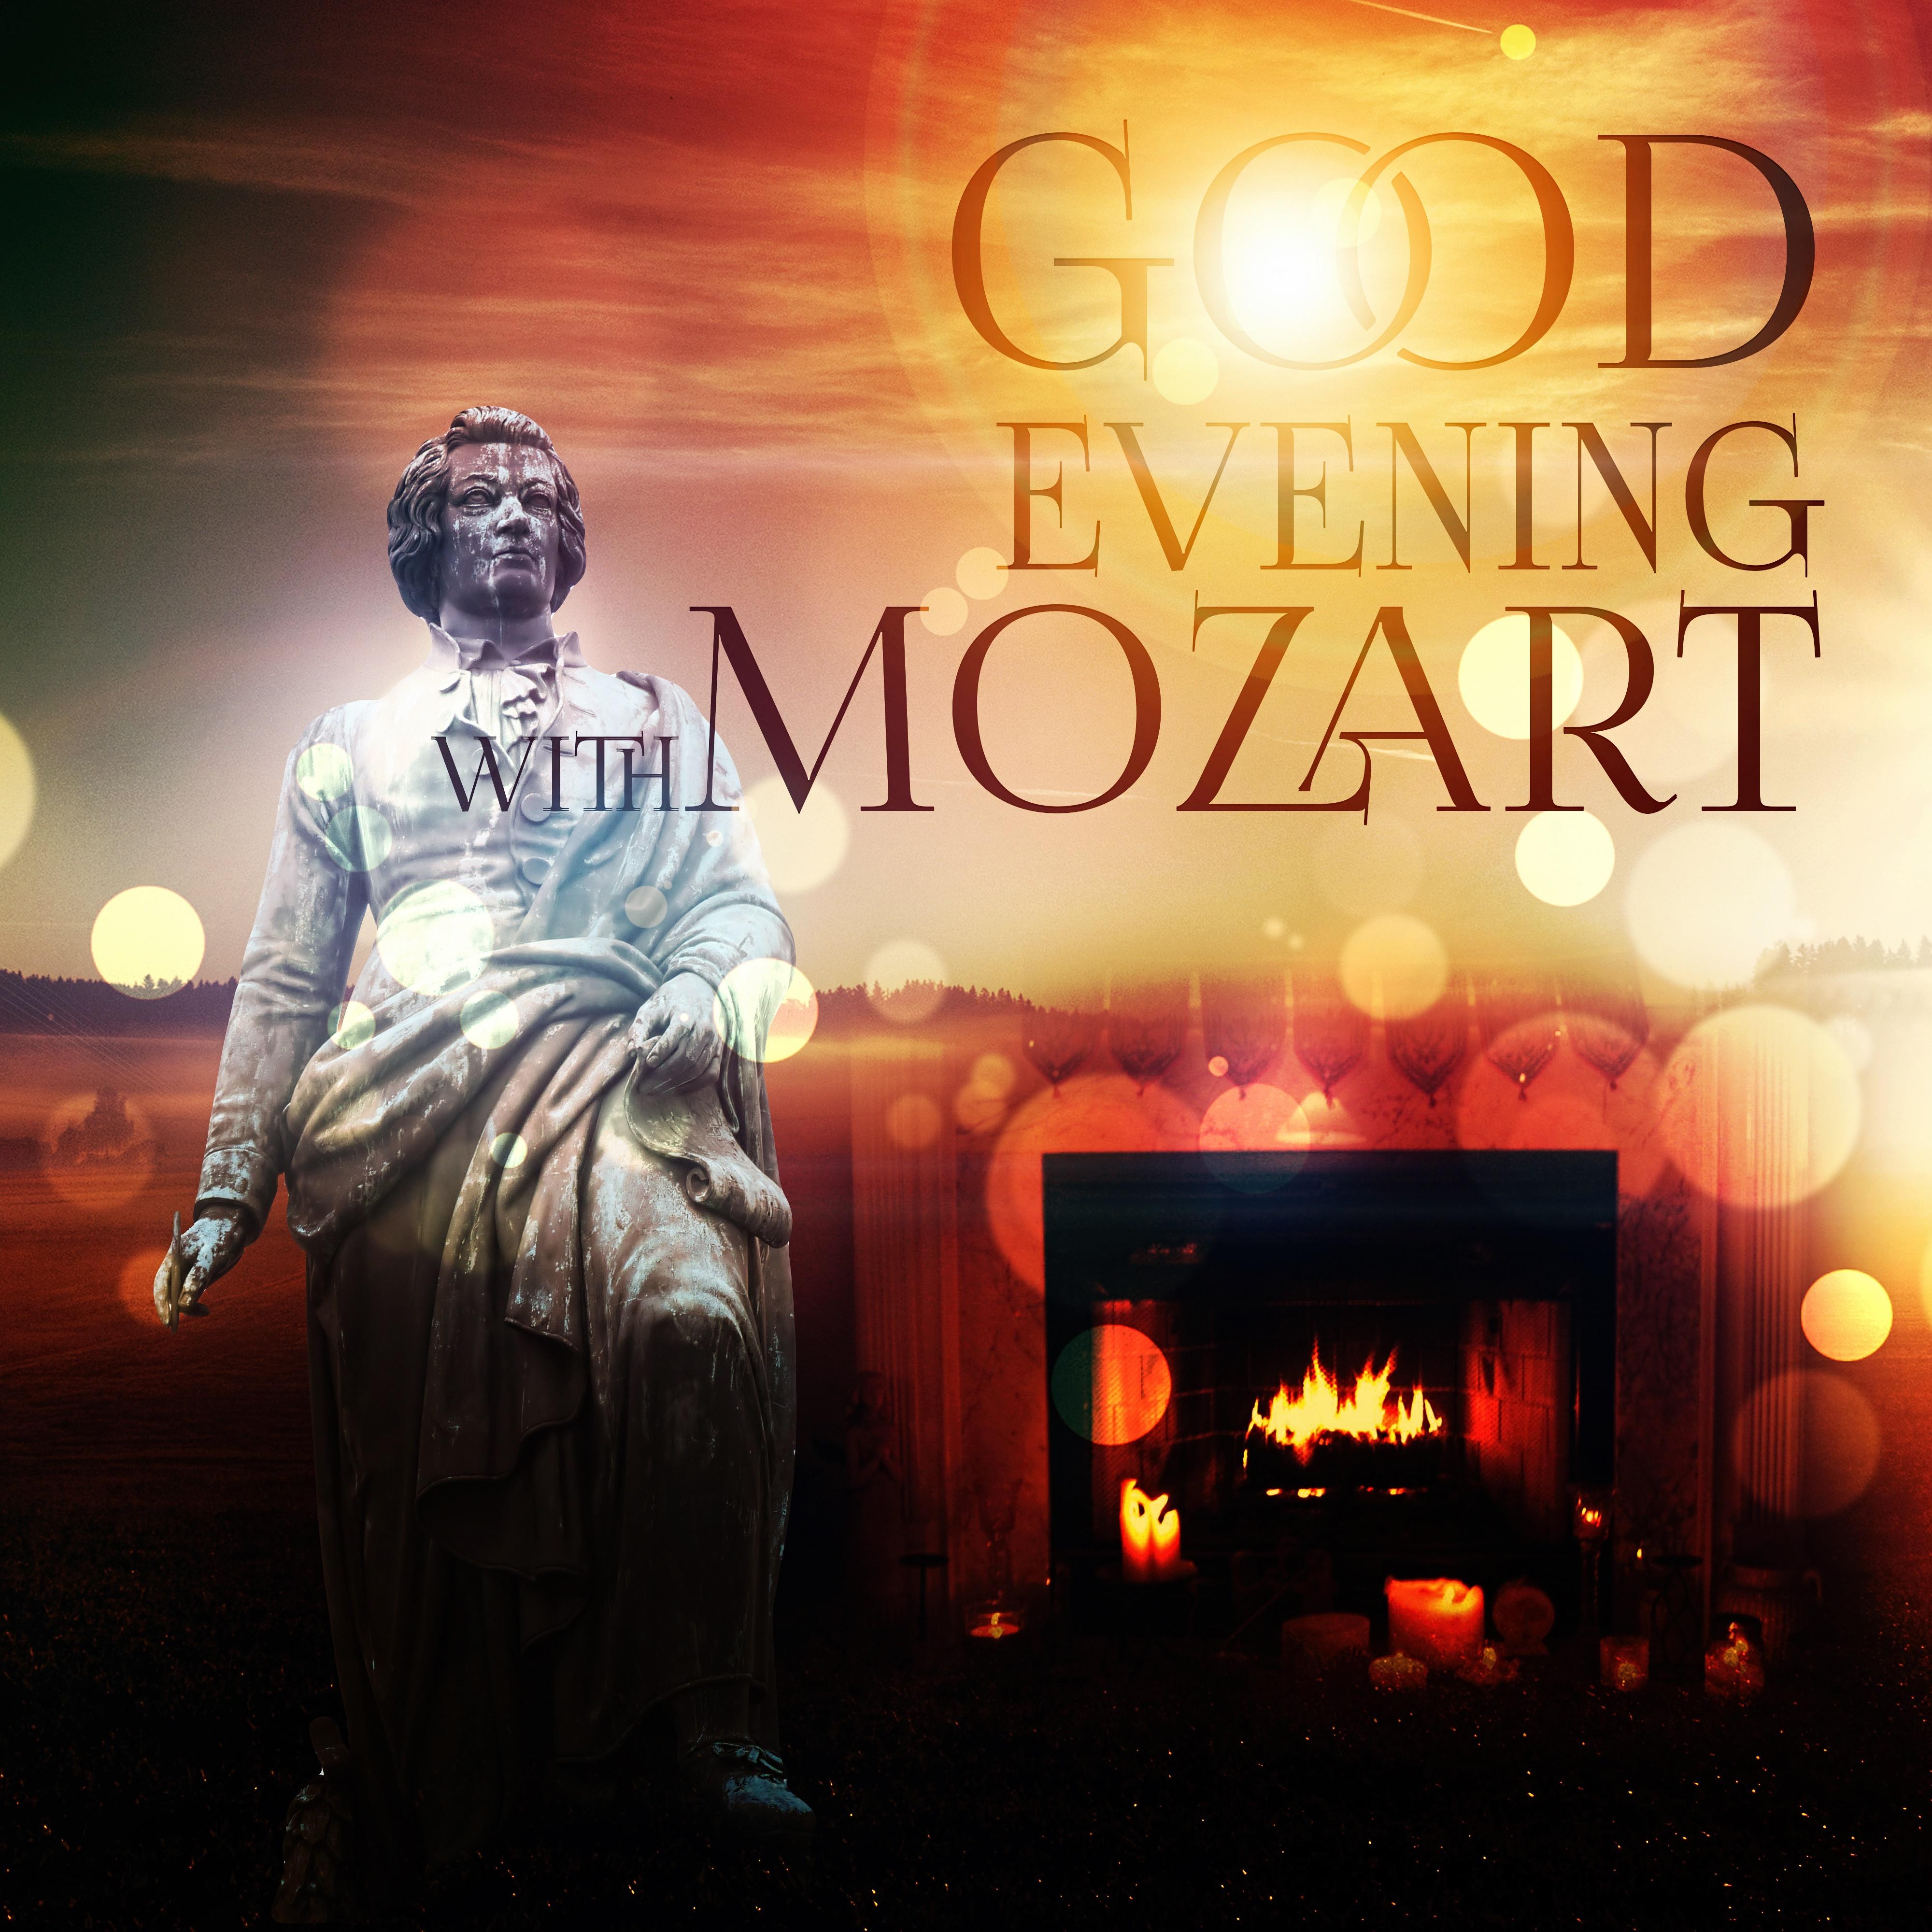 Good Evening with Mozart – Relaxing Piano for Evening Time, Glass of Wine with Mood Music, Serenity Music, Super Rest next to Fireplace, Beautiful Moments with Mozart, Stress Relief, Good Time with Friends